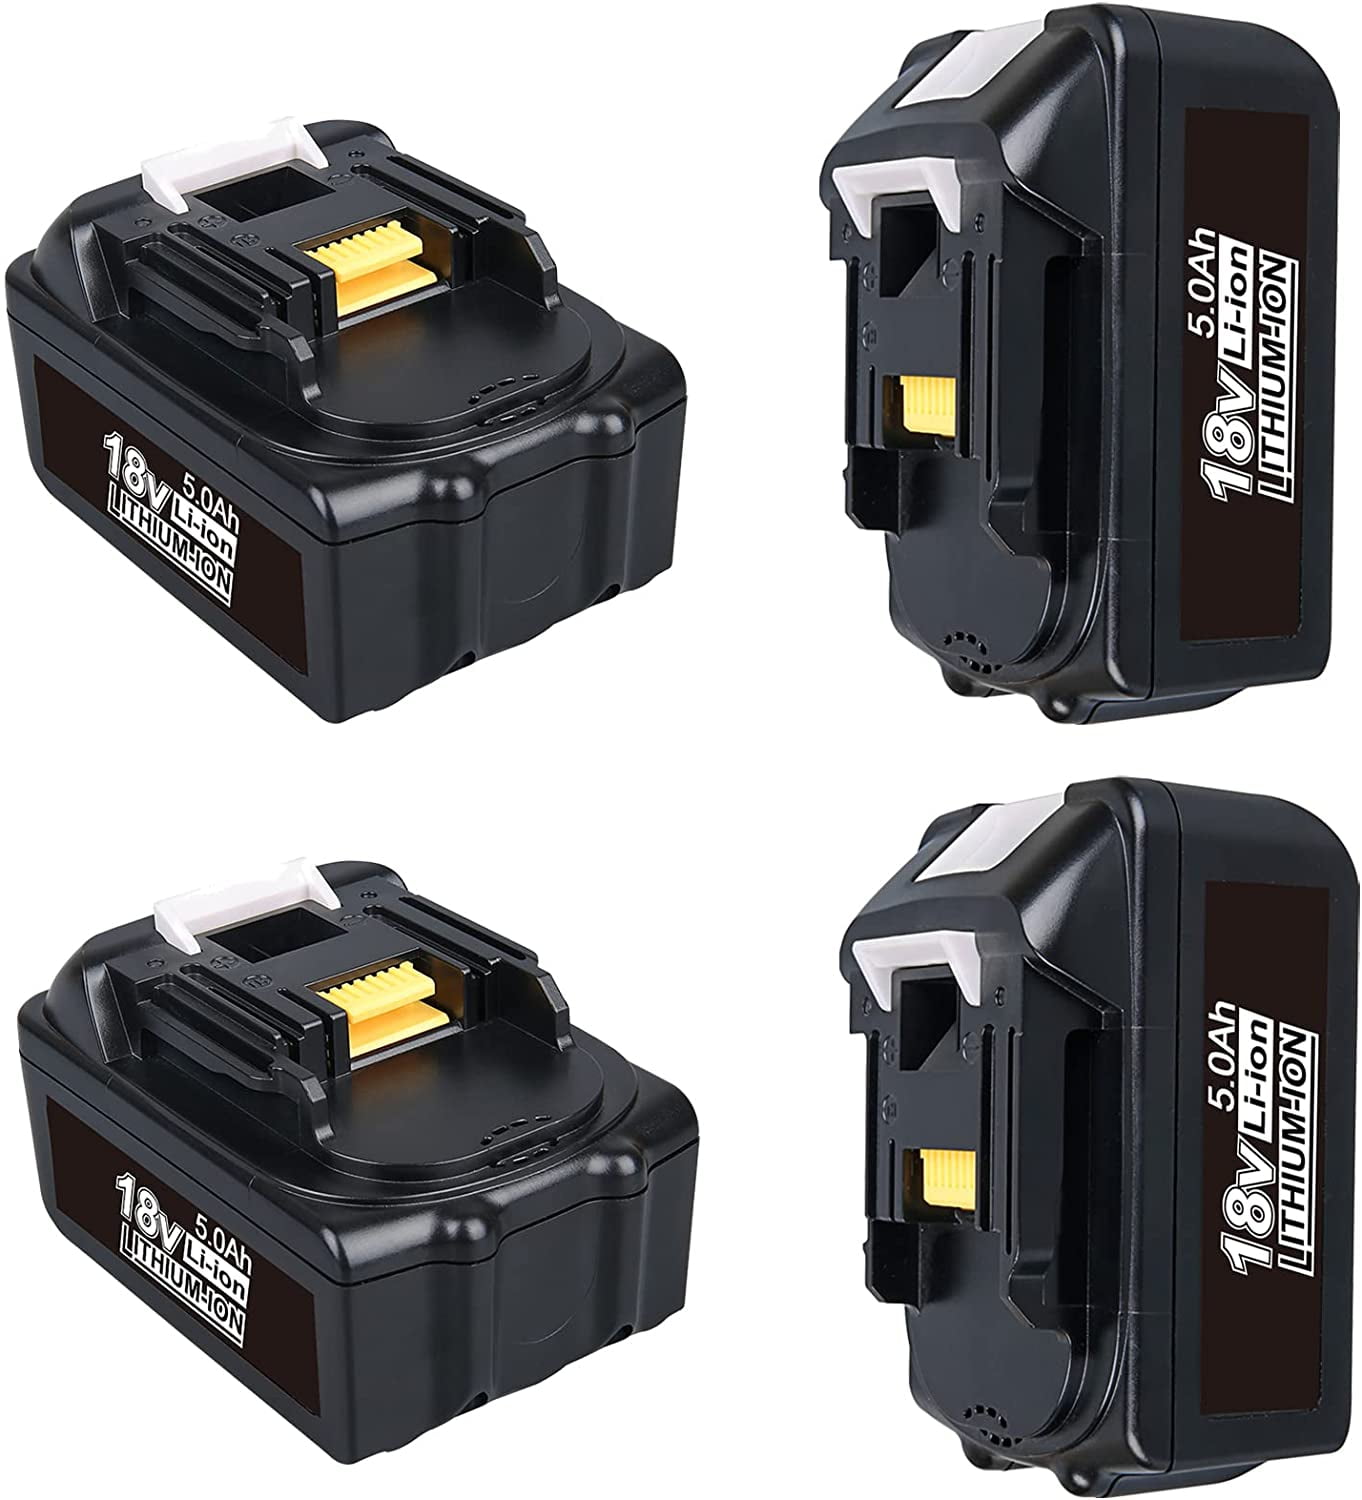 4 NEW For Makita BL1860 BL1840 LXT 18V 6.0Ah Lithium Ion Battery BL1860 194204-5 